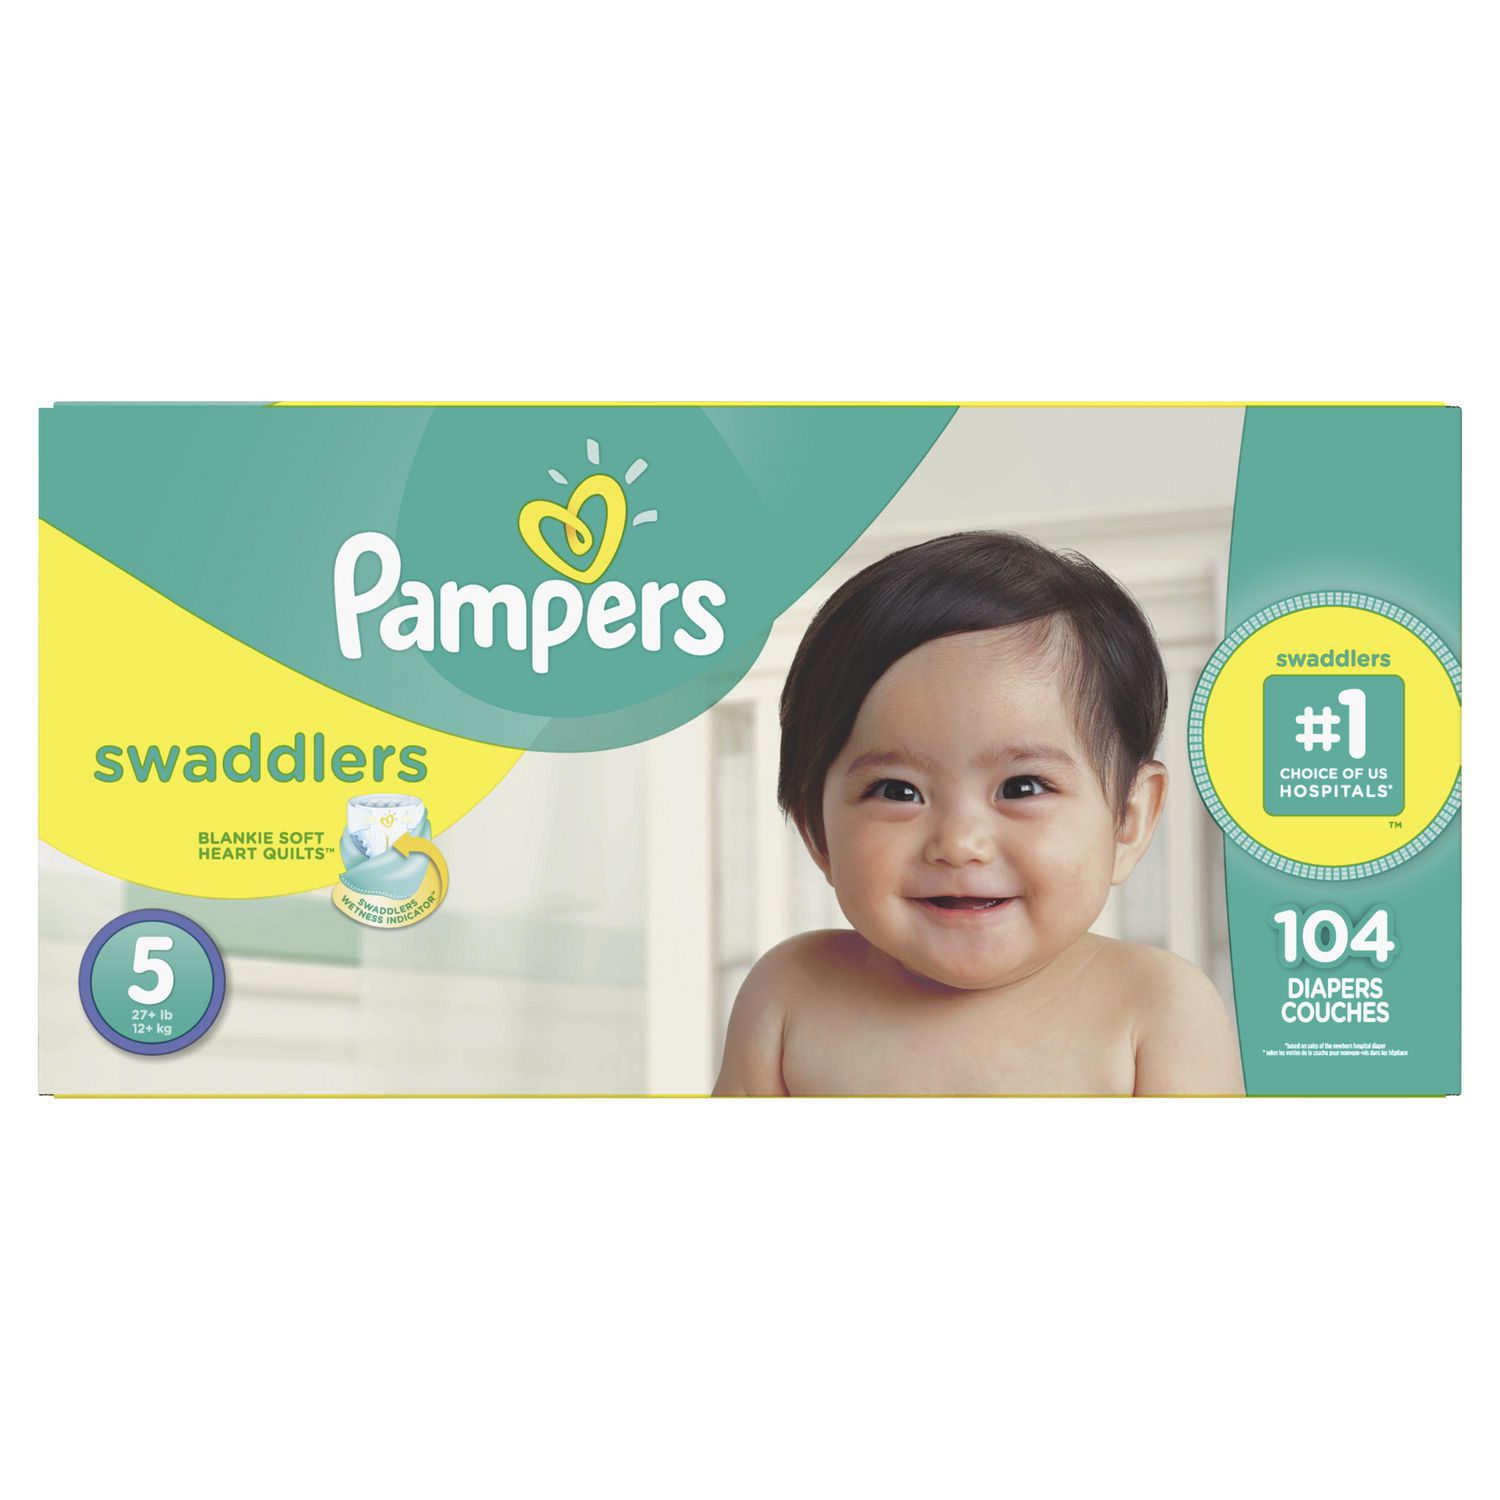 Pampers Swaddlers Size Newborn Diapers FULL CASE 12 Packs of 20 = 240 count 